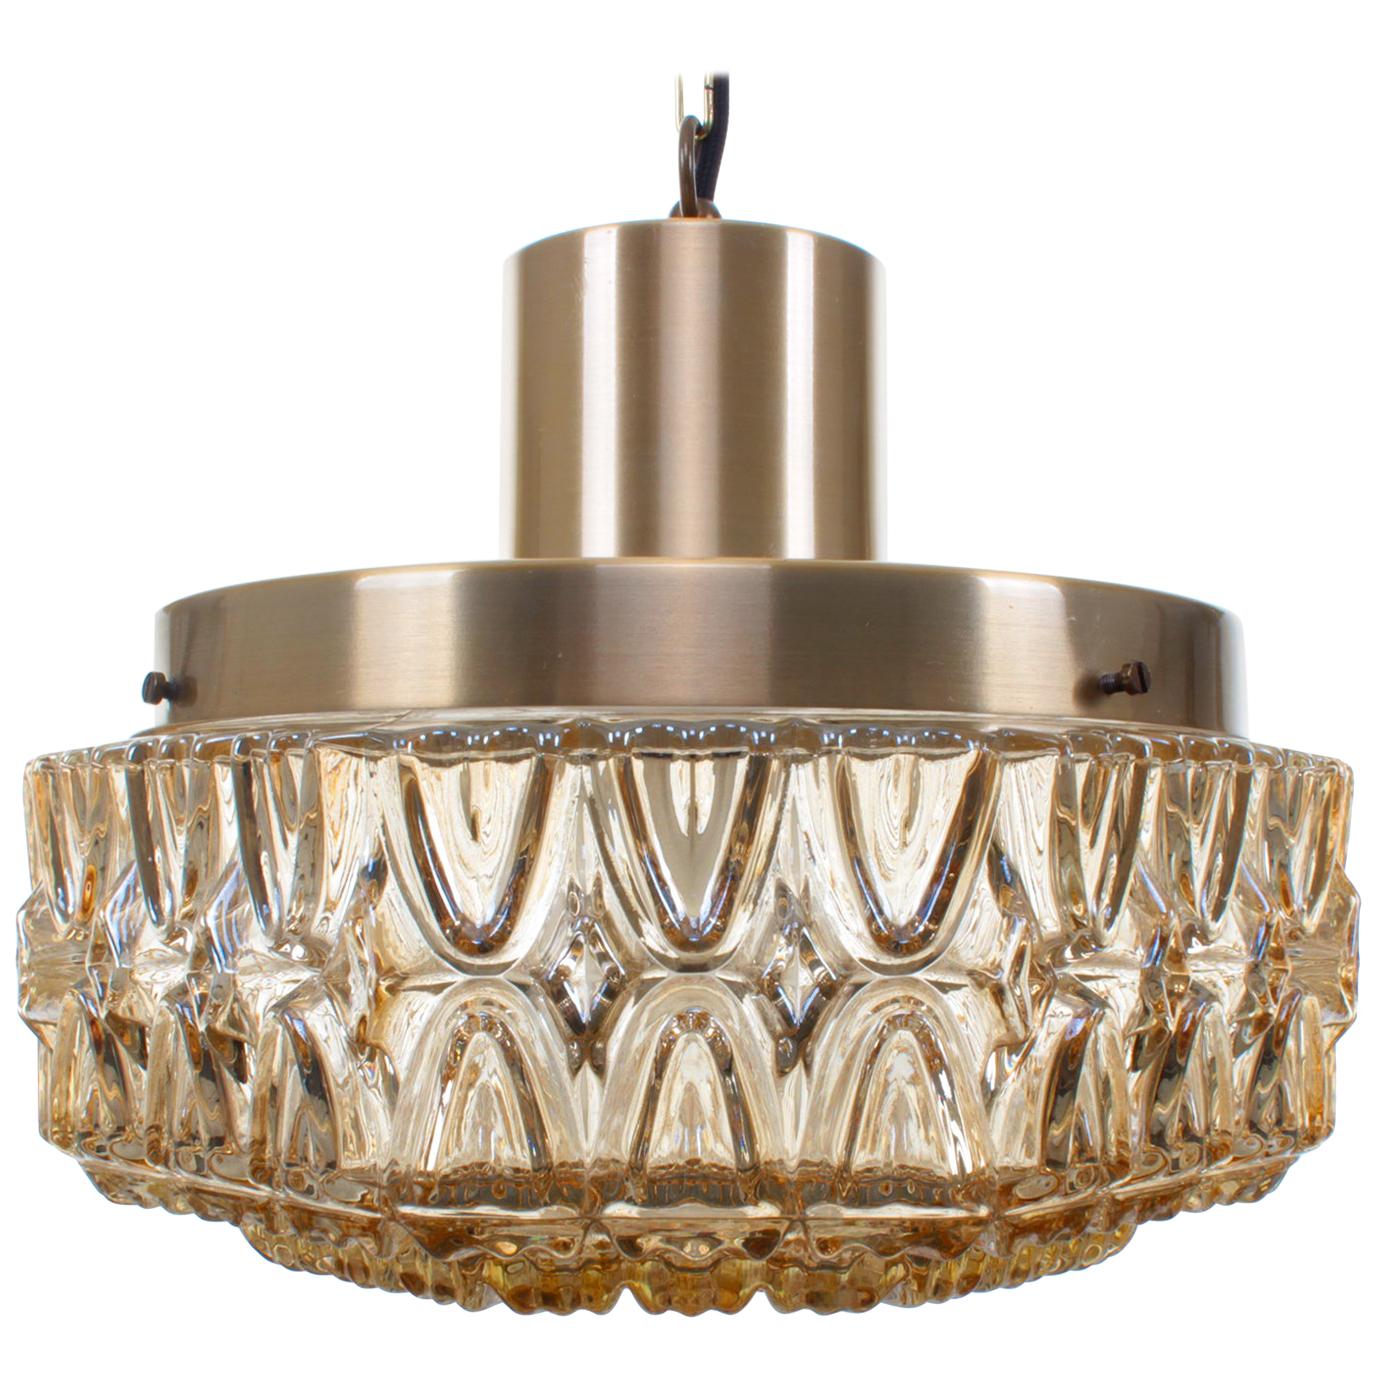 Pressed Glass and Brass, Scandinavian Pendant Light from the 1960s